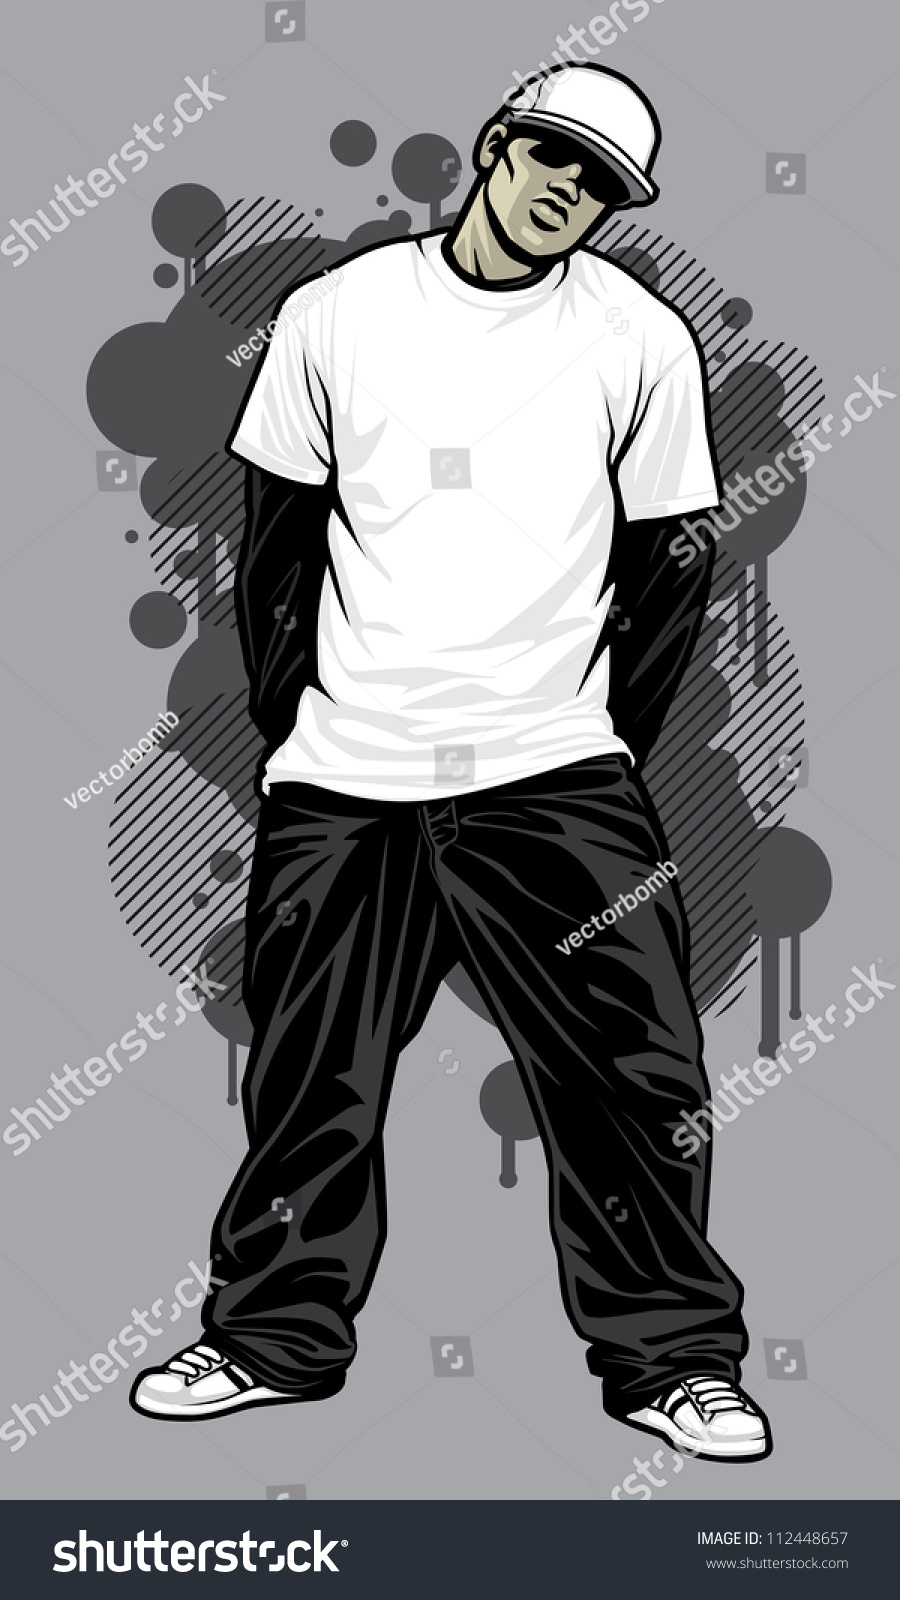 Urban Male Tshirt Model Vector Illustration Of A Young Urban Male Model ...